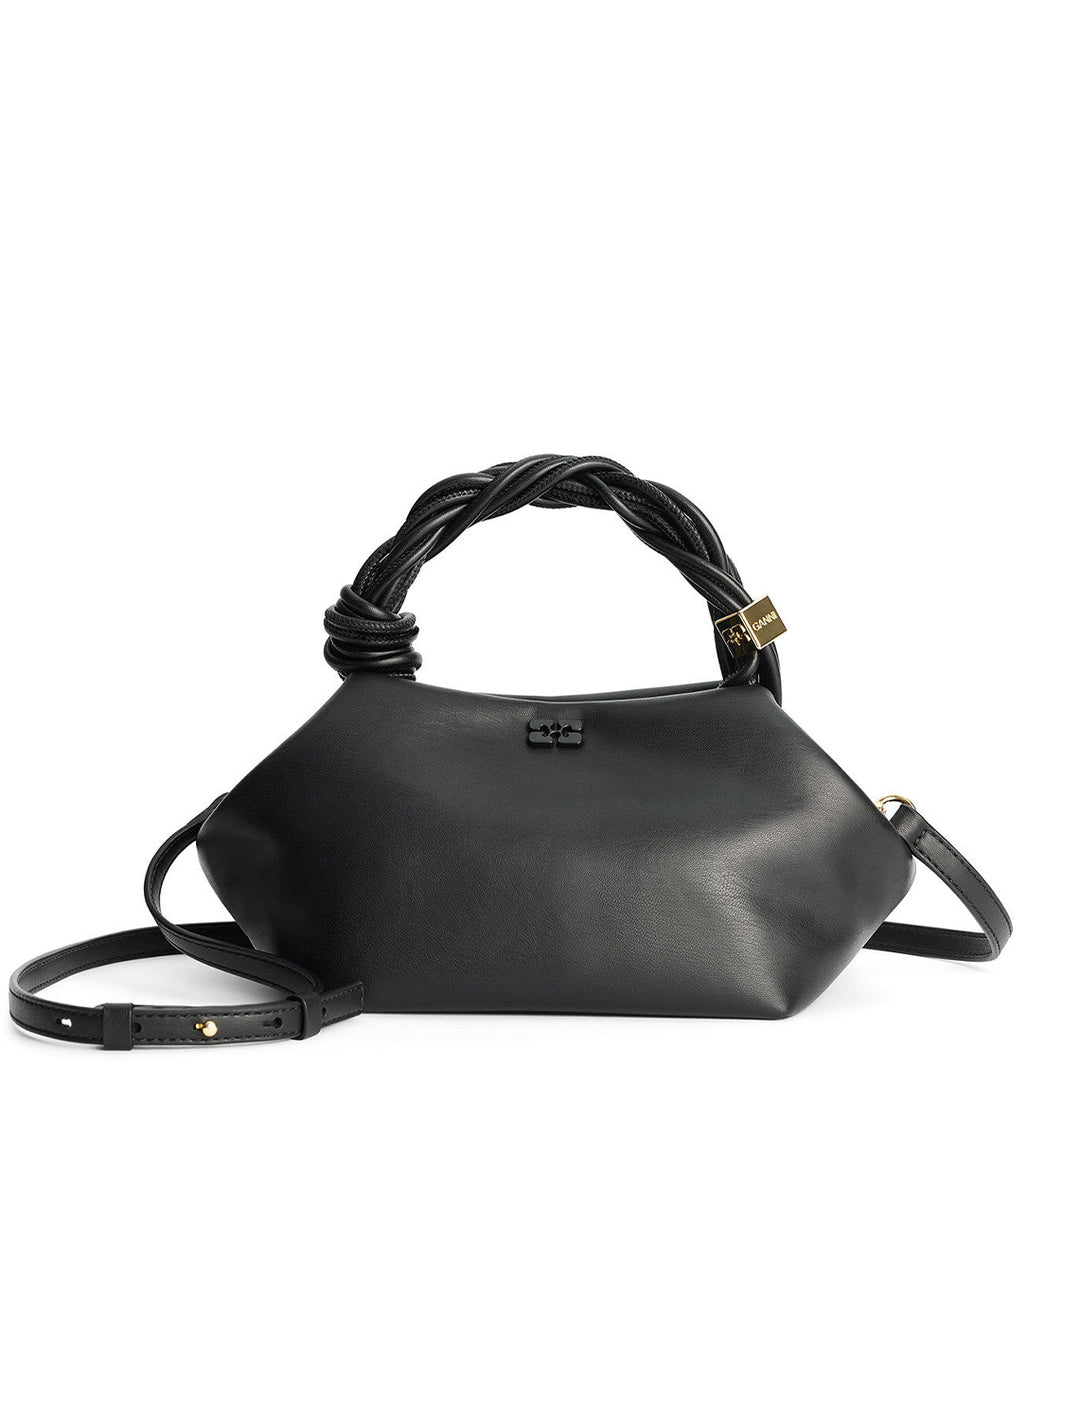 Front view of GANNI's small bou bag in black.